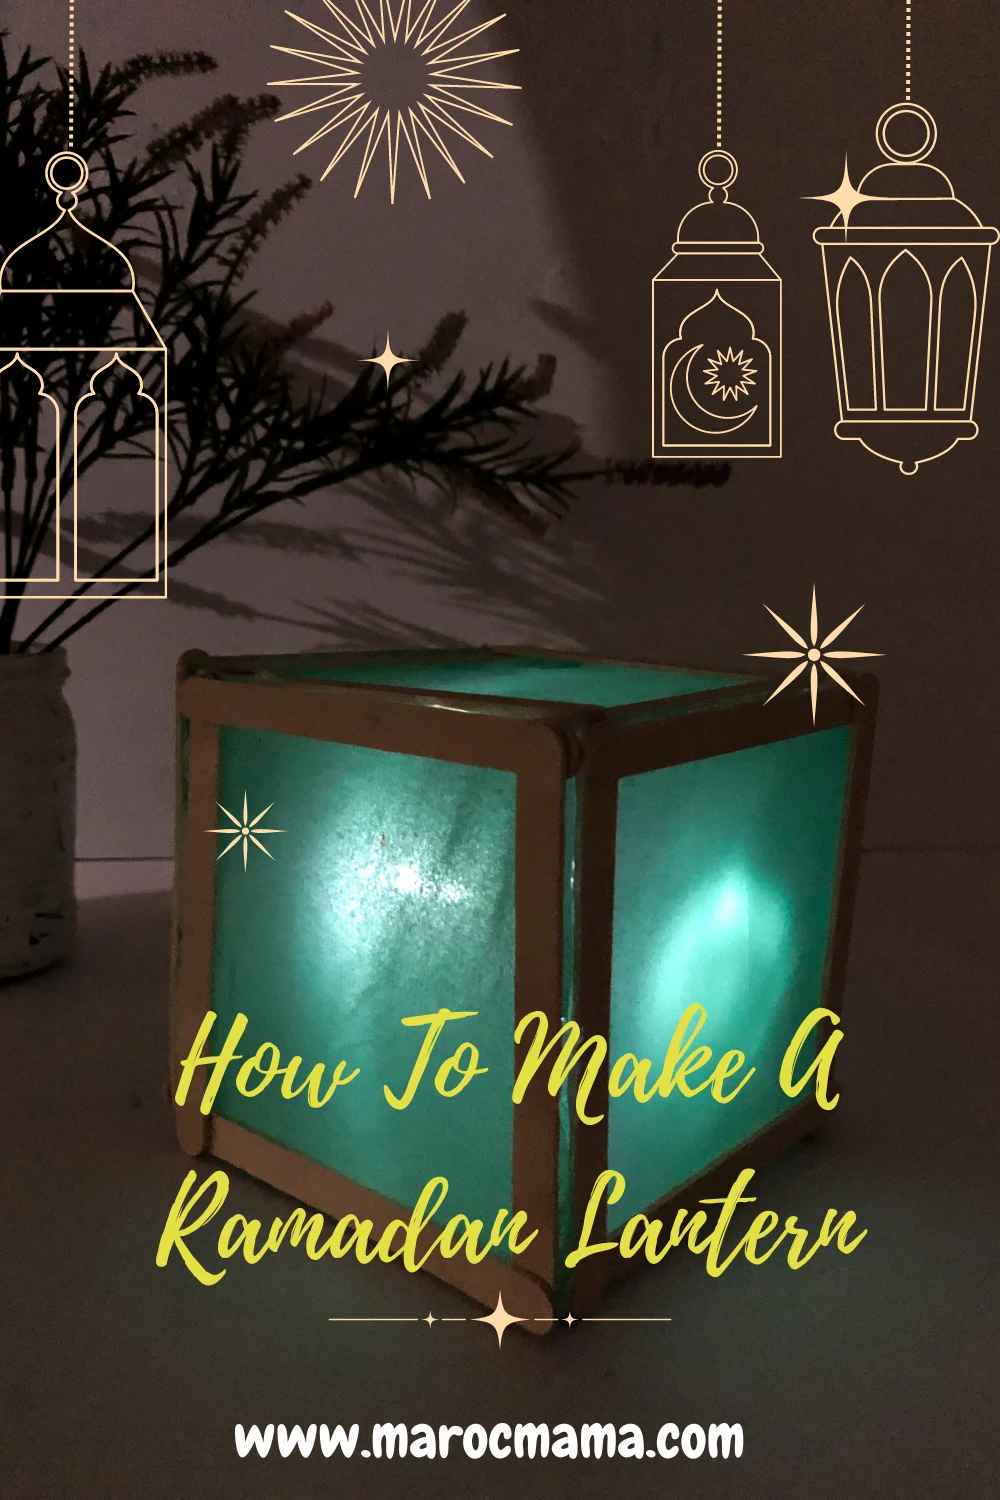 A finished product of how to make a Ramadan lantern.